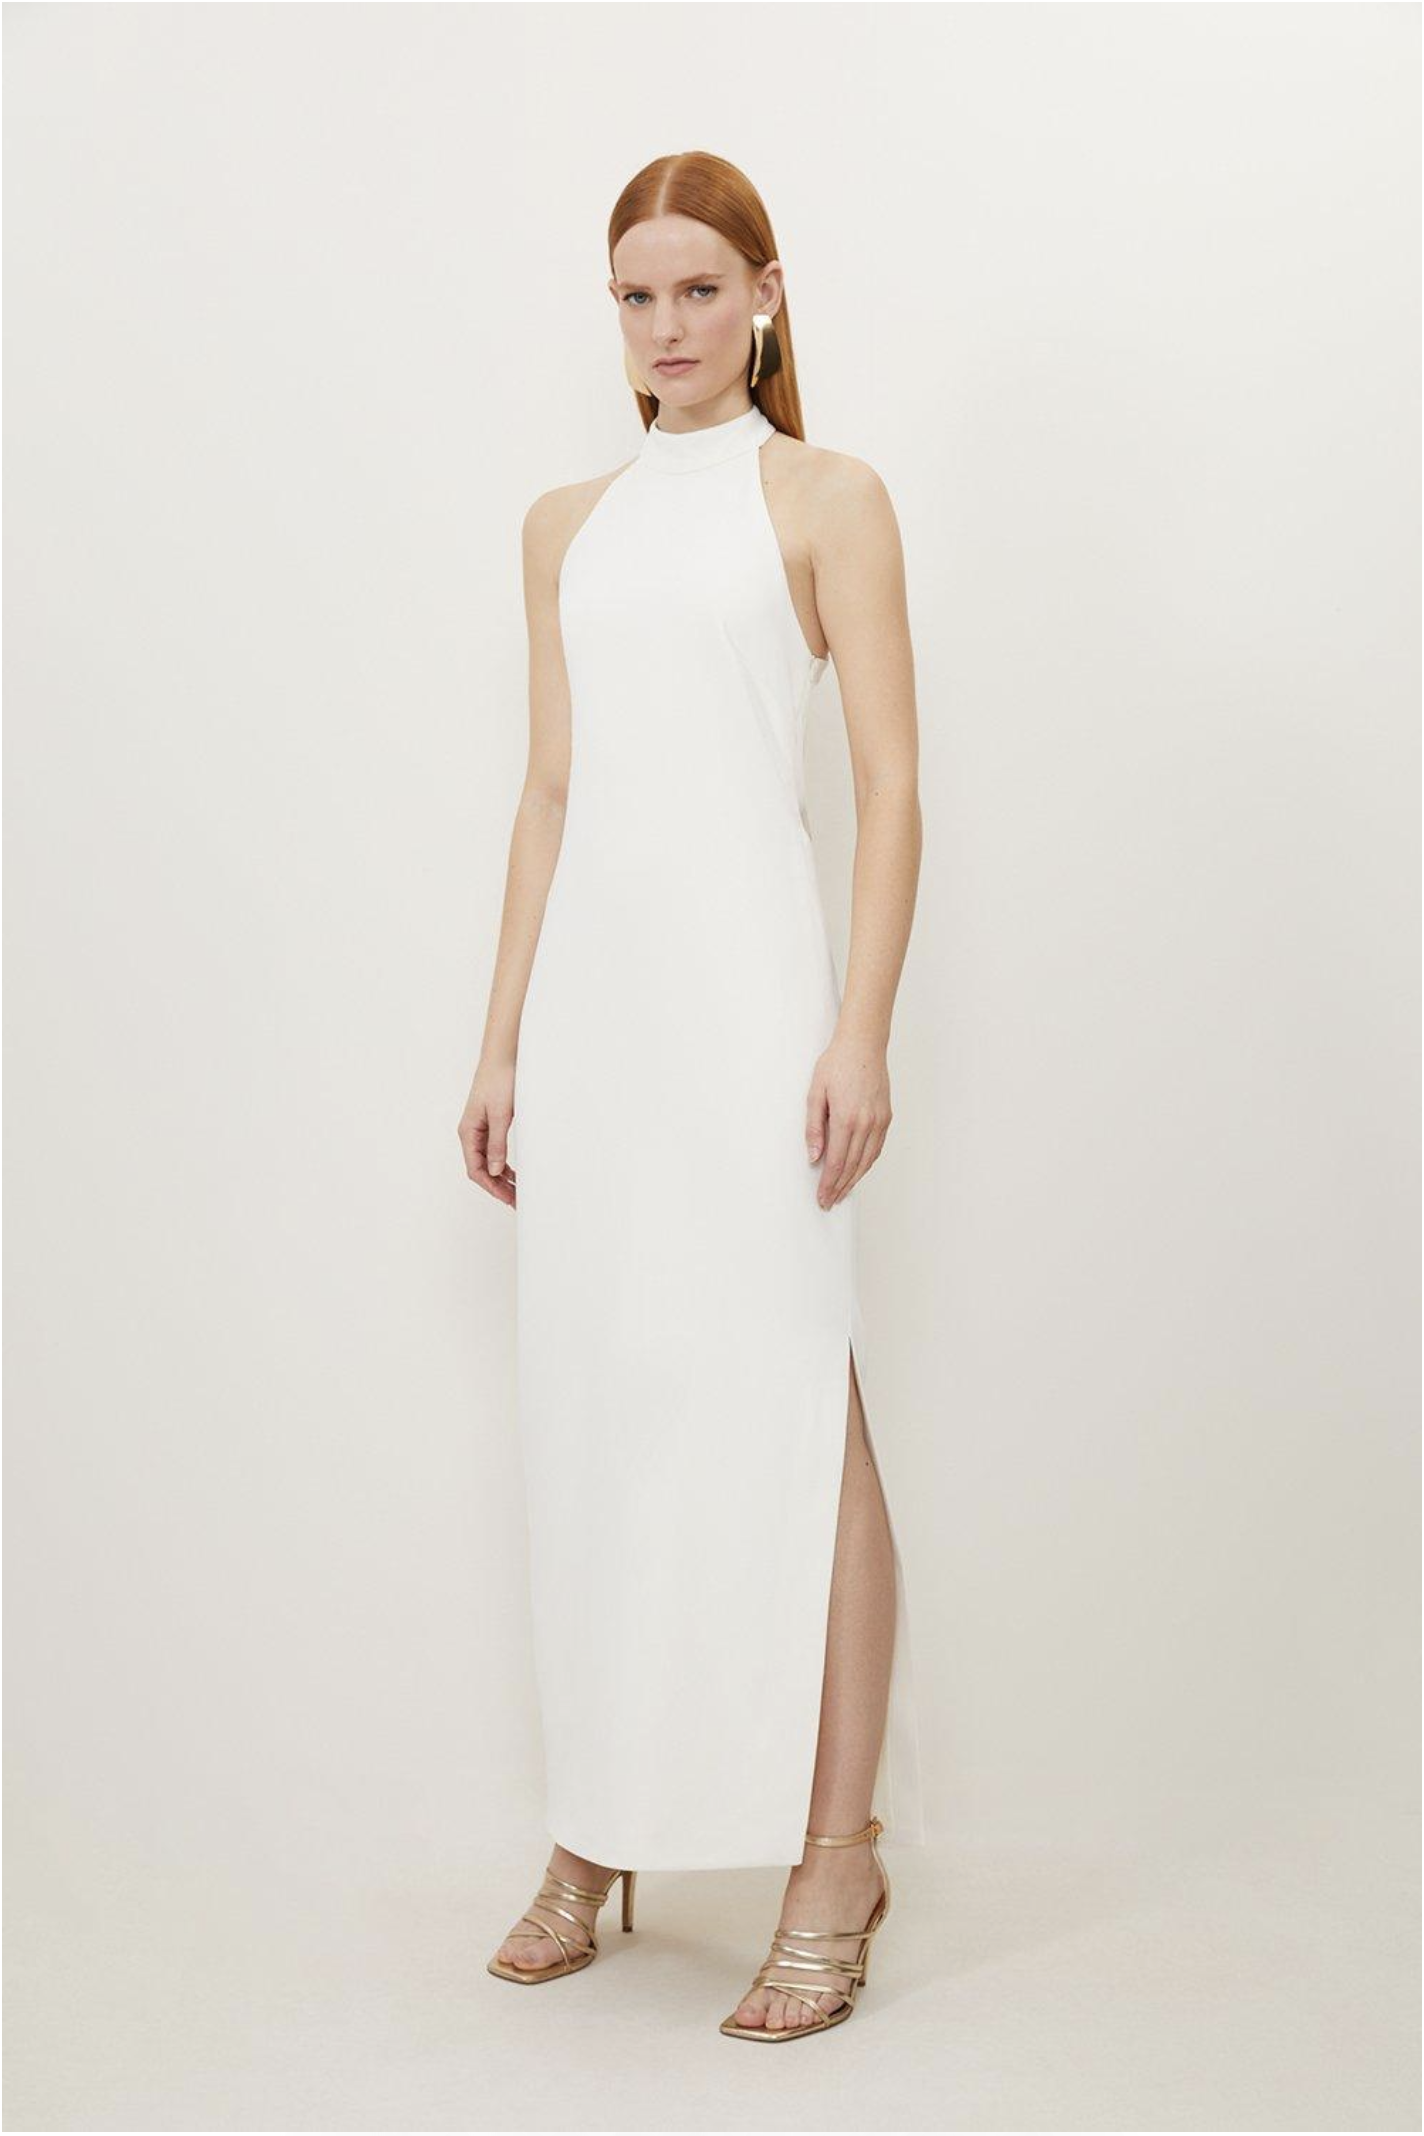 Explore the best white maxi dresses of the season, from elegant halternecks to breezy tiered styles, perfect for every summer occasion. Discover your next wardrobe staple. White Maxi Dress | White Maxi Dresses | White Maxi Dress Outfit | White Maxi Dress Outfits | White Maxi Dresses Outfits | White Maxi Dresses Outfit | White Maxie Dress | White Maxy Dresses | White Maxy Dress | White Dress | Maxi Dress | White Dress Outfit | Maxi Dress Outfit | White Summer Dress | White Dresses